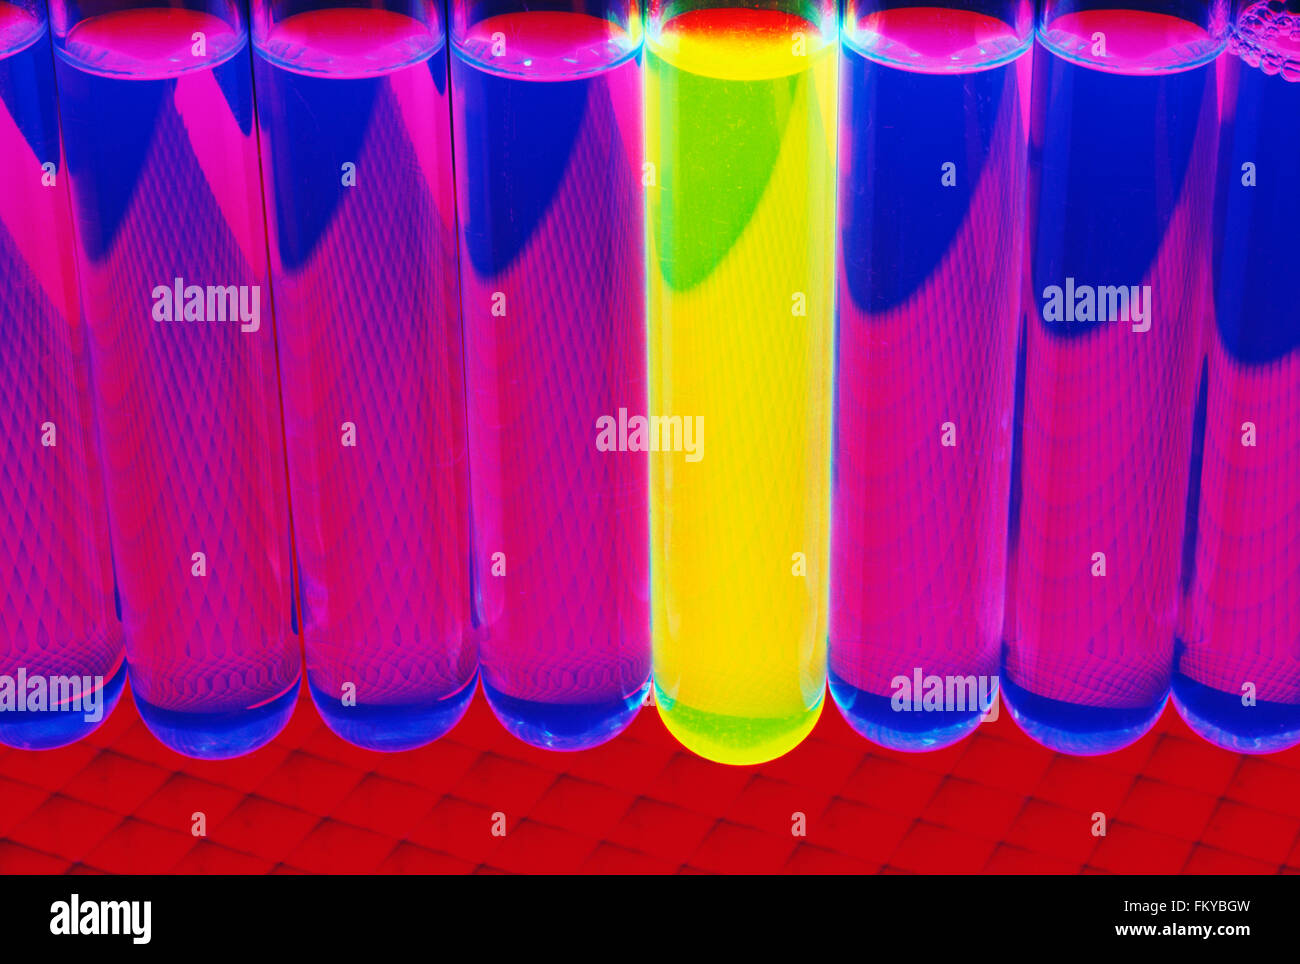 Row of Test Tubes in a test tube rack Stock Photo